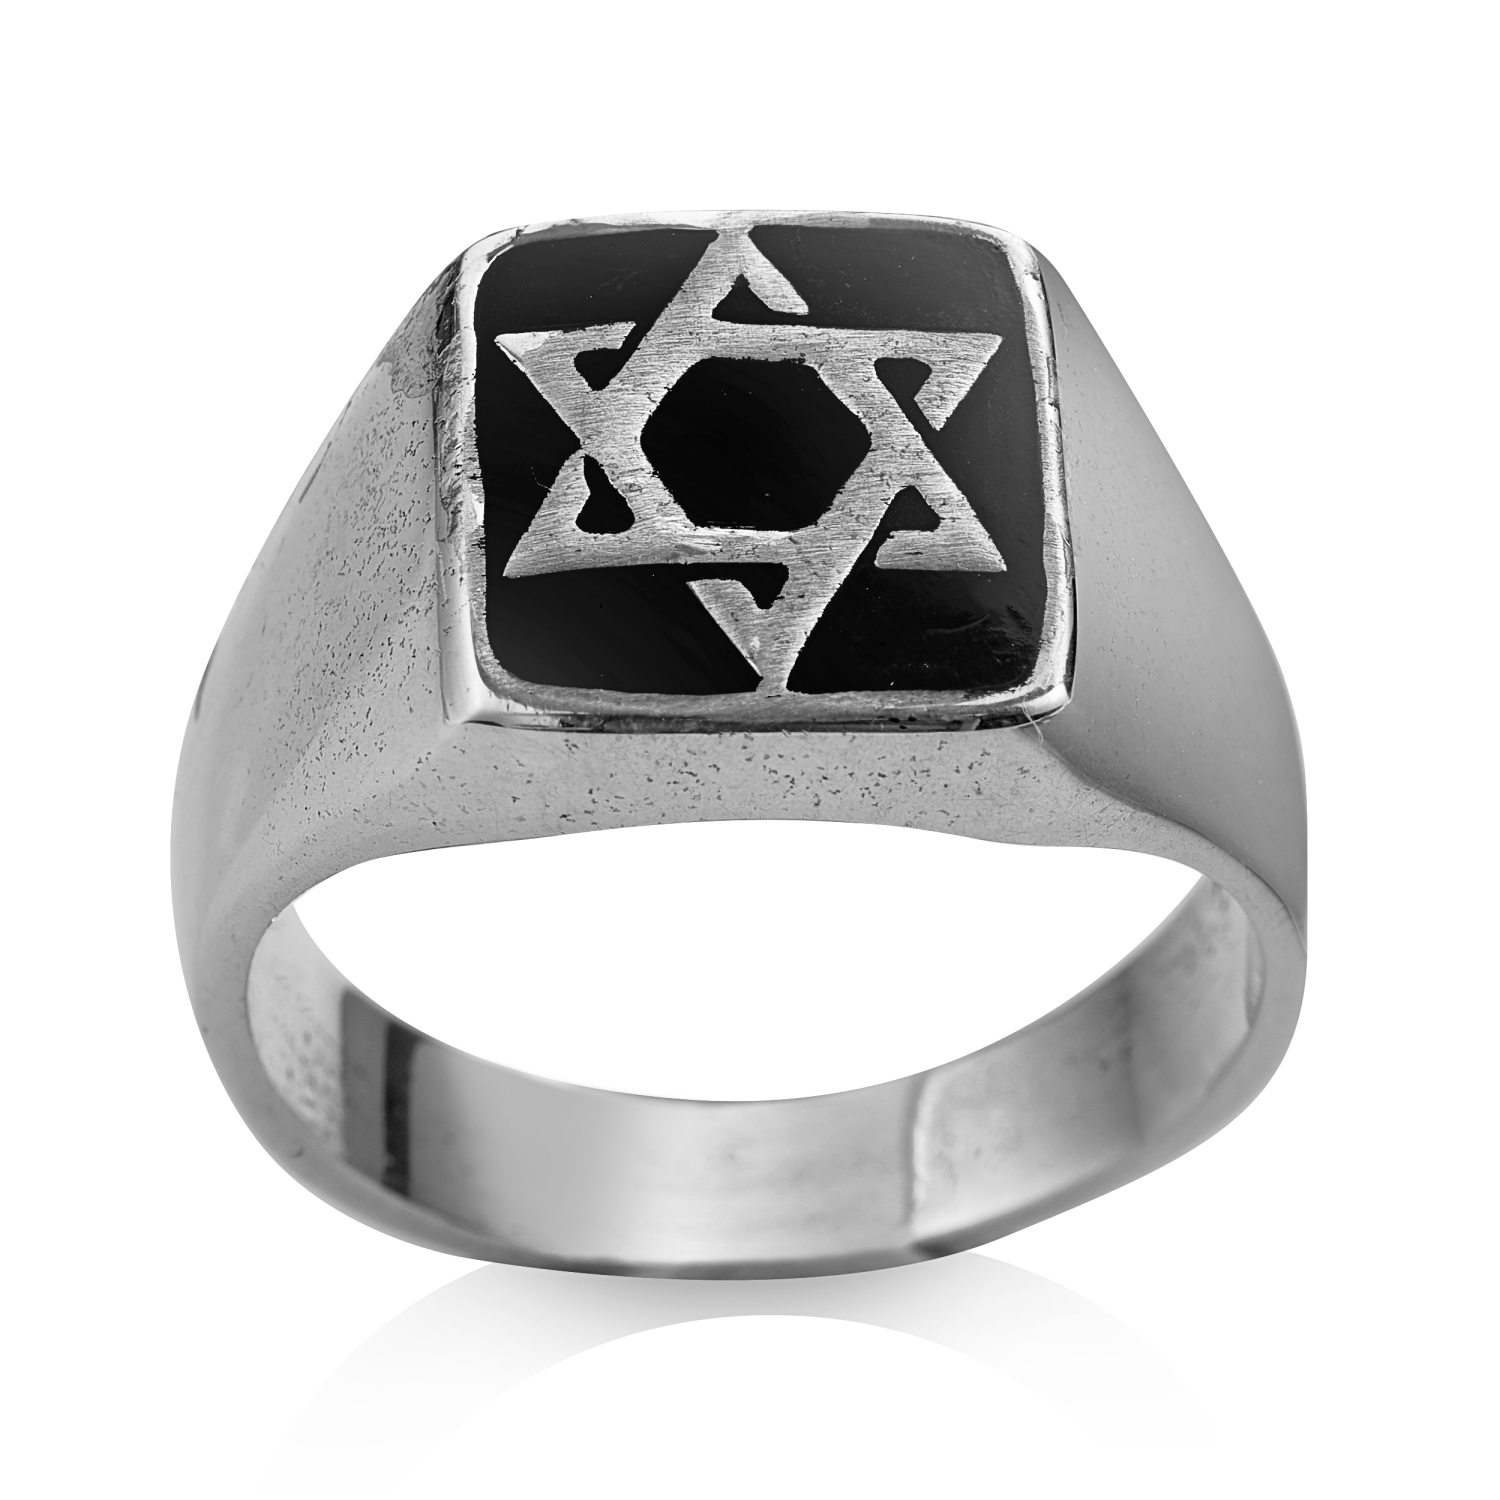 Sterling Silver and Black Enamel Star of David Ring - 1